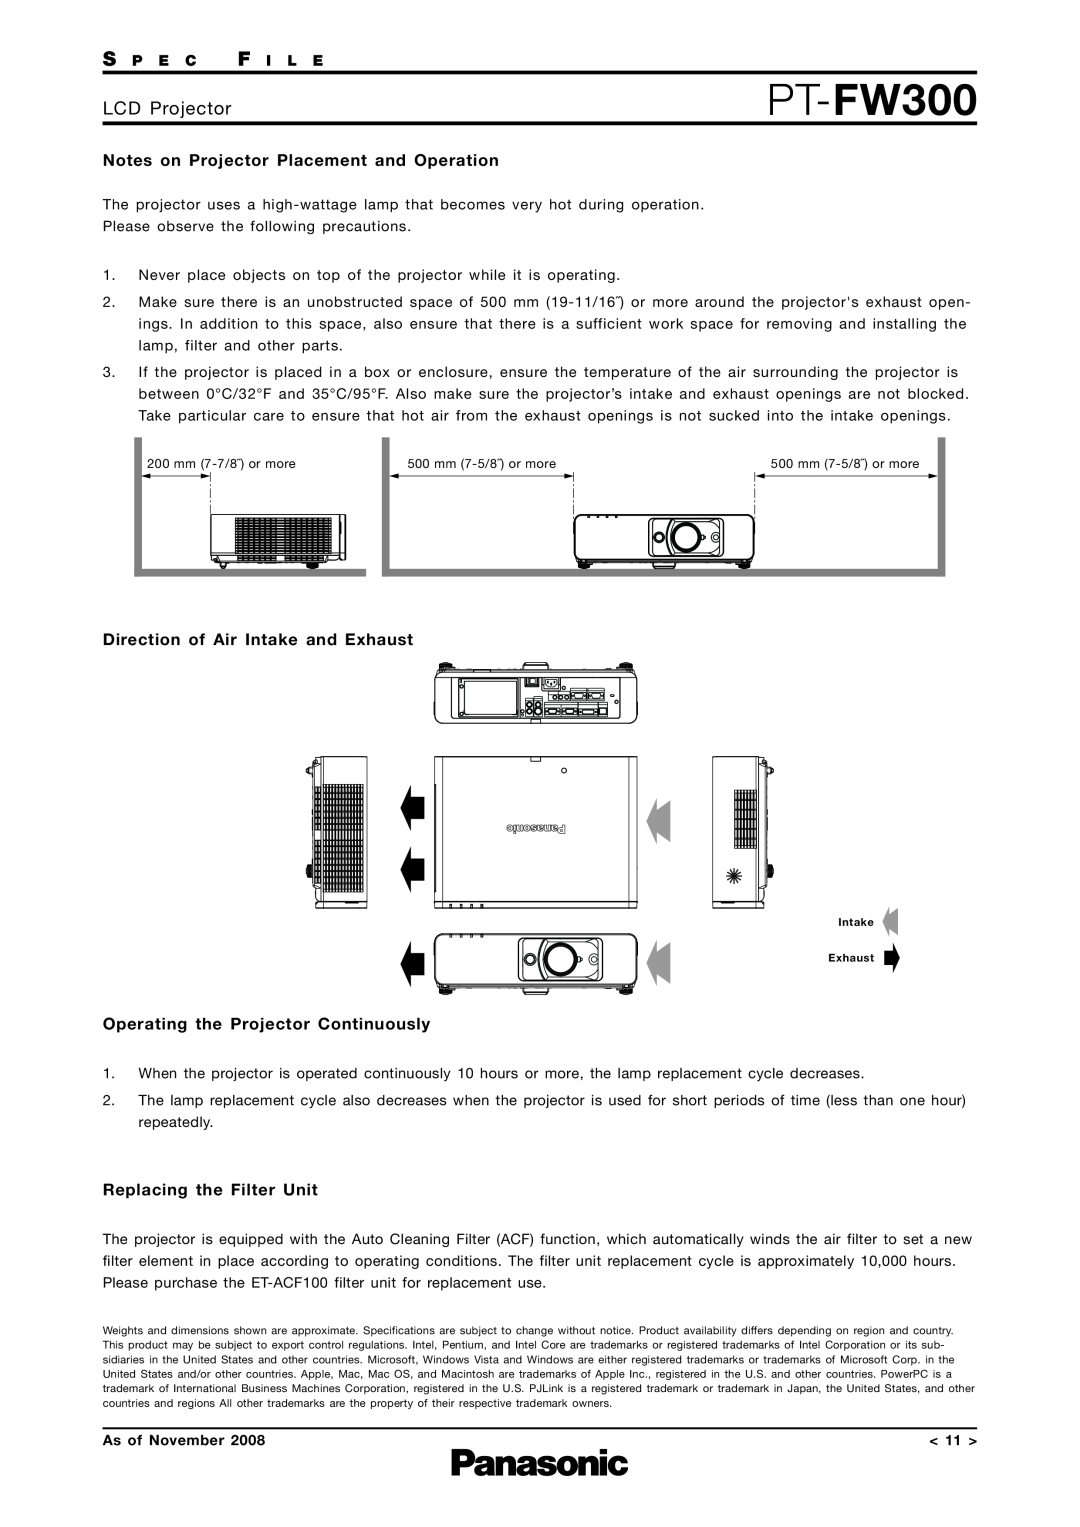 Panasonic PT-FW300 Notes on Projector Placement and Operation, Direction of Air Intake and Exhaust, LCD Projector 